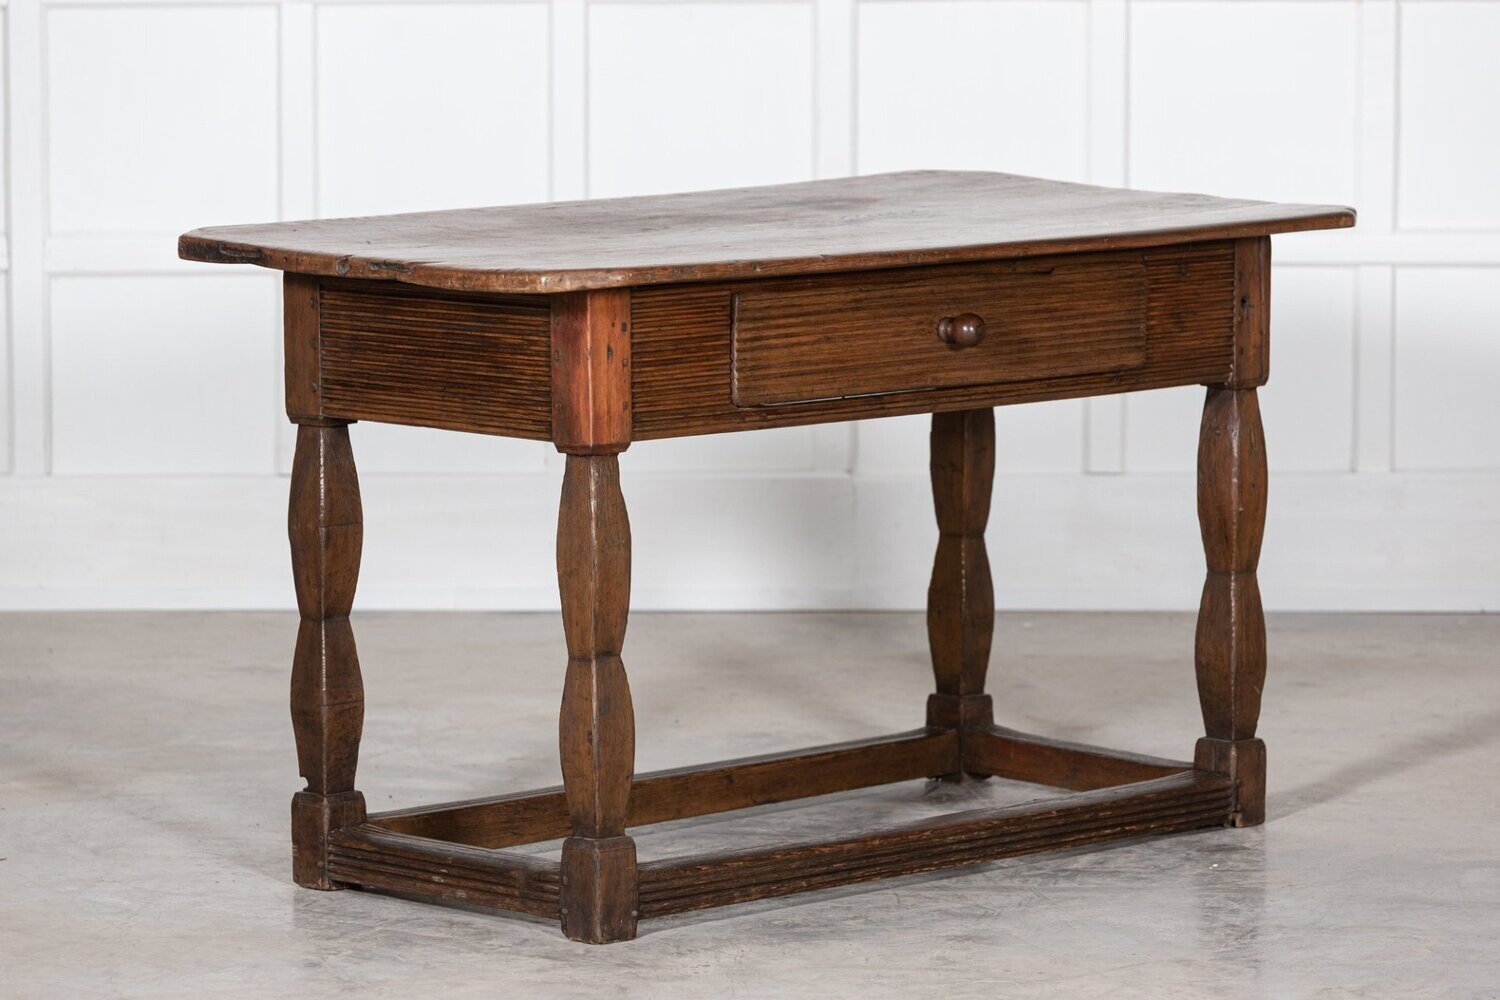 19thC Swedish Provincial Pine Refectory Table